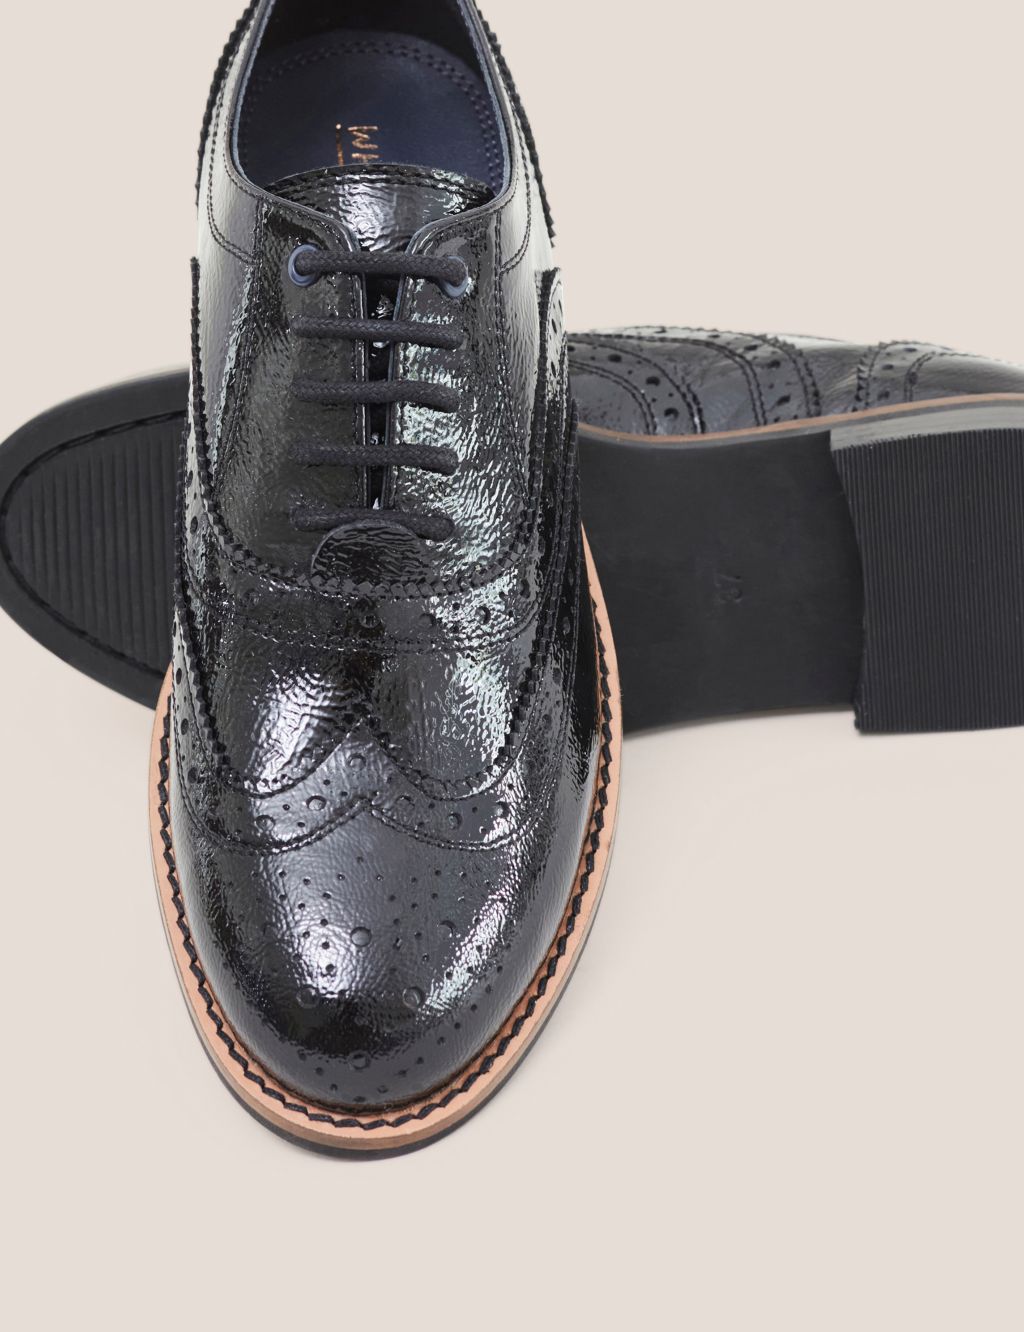 Leather Patent Lace Up Flat Brogues image 3